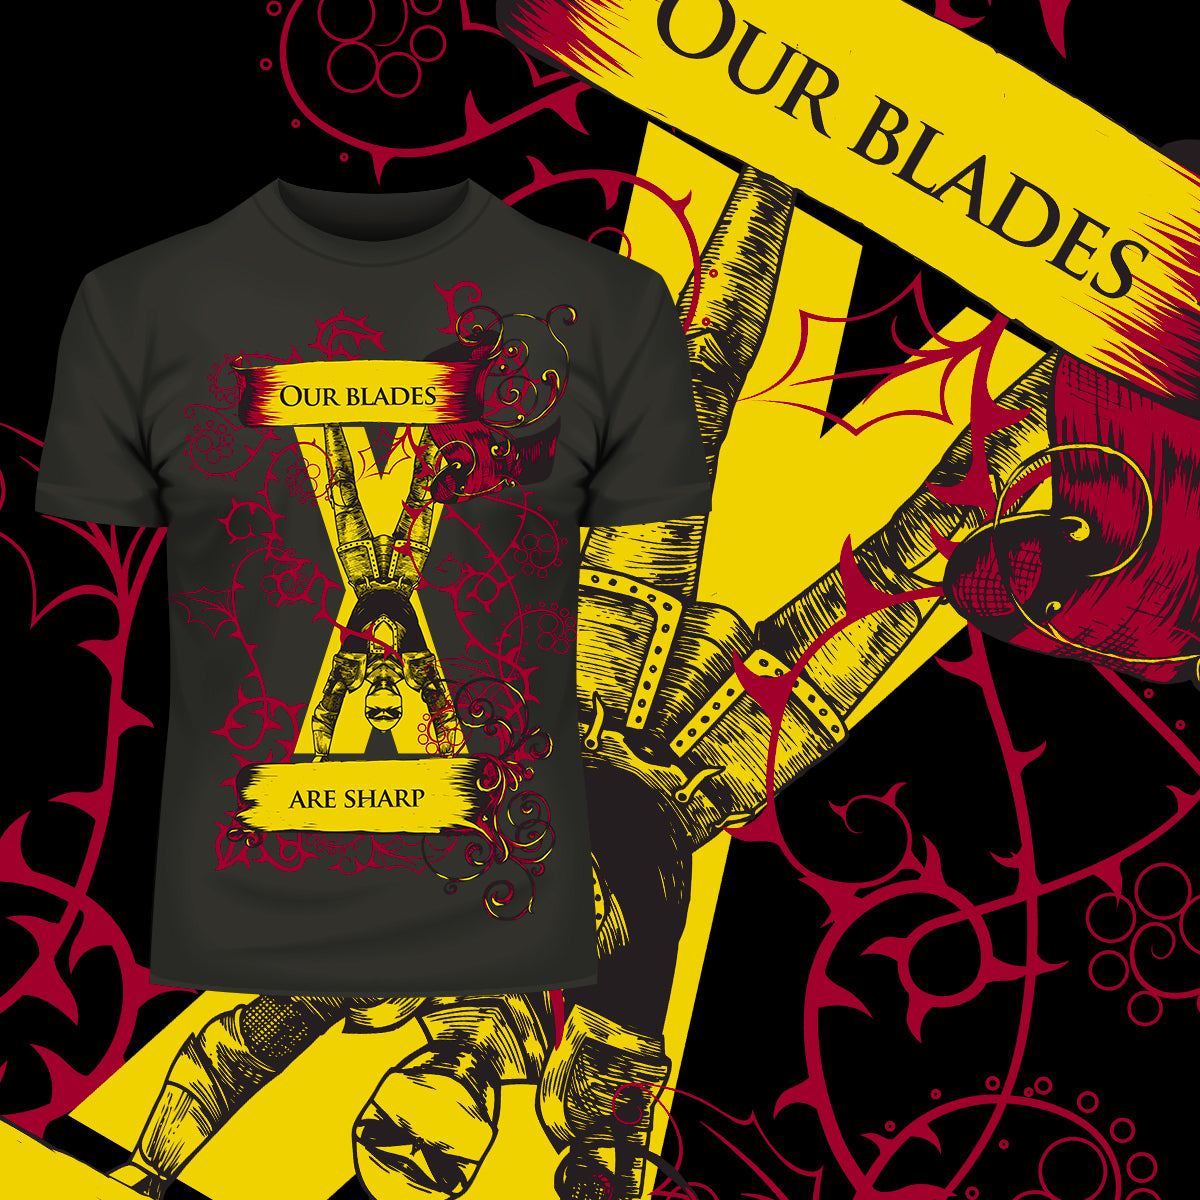 Pop Culture T-Shirt Game of Thrones - Our Blades Are Sharp - Kuzi Tees